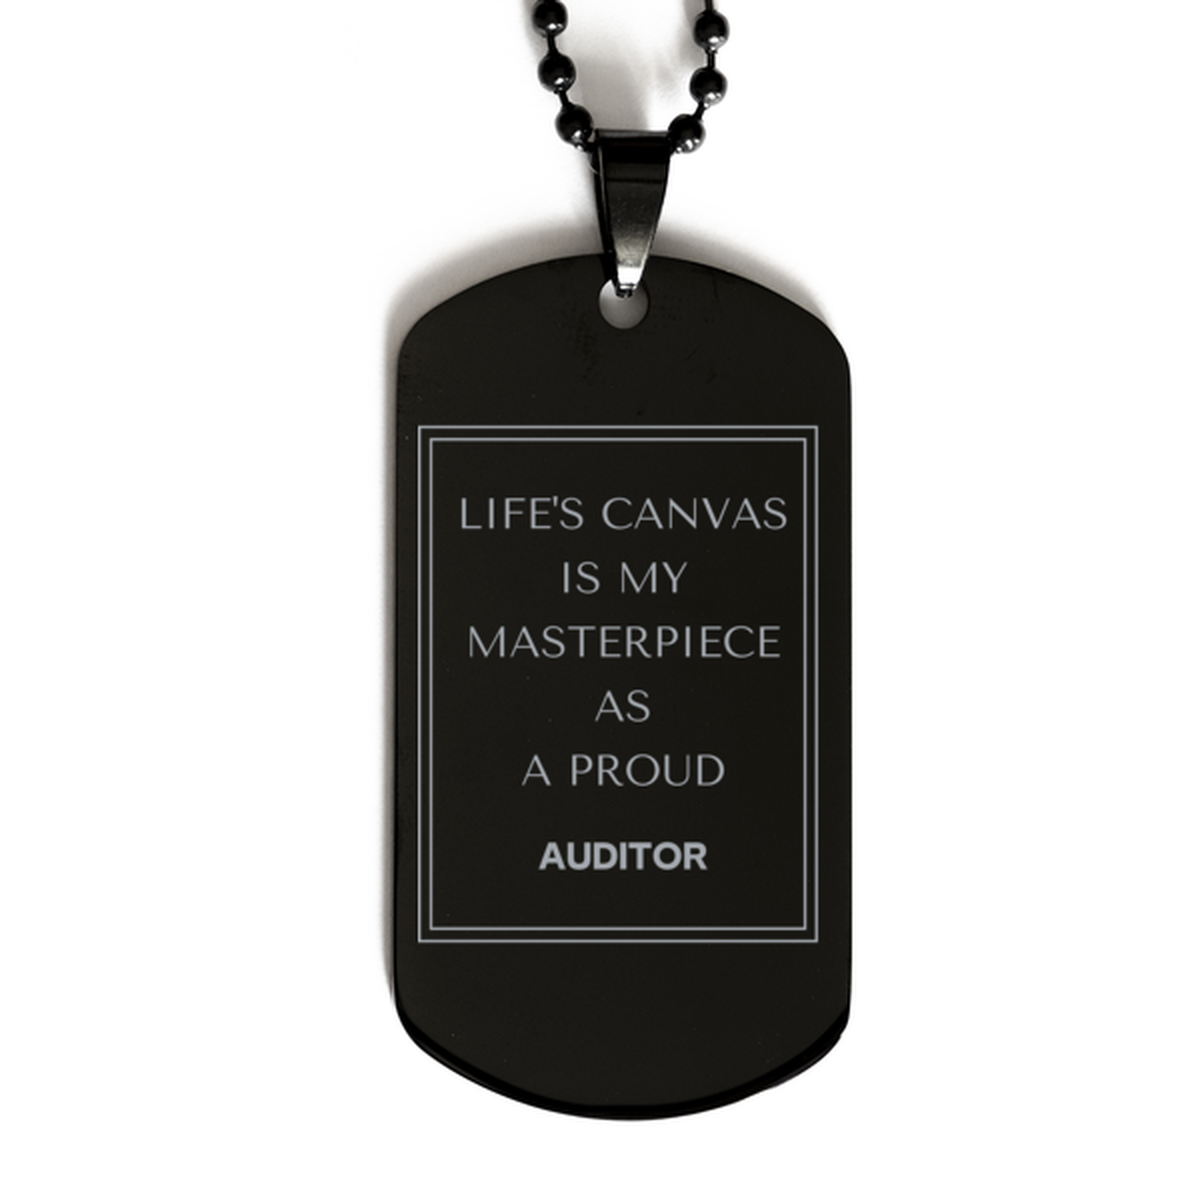 Proud Auditor Gifts, Life's canvas is my masterpiece, Epic Birthday Christmas Unique Black Dog Tag For Auditor, Coworkers, Men, Women, Friends